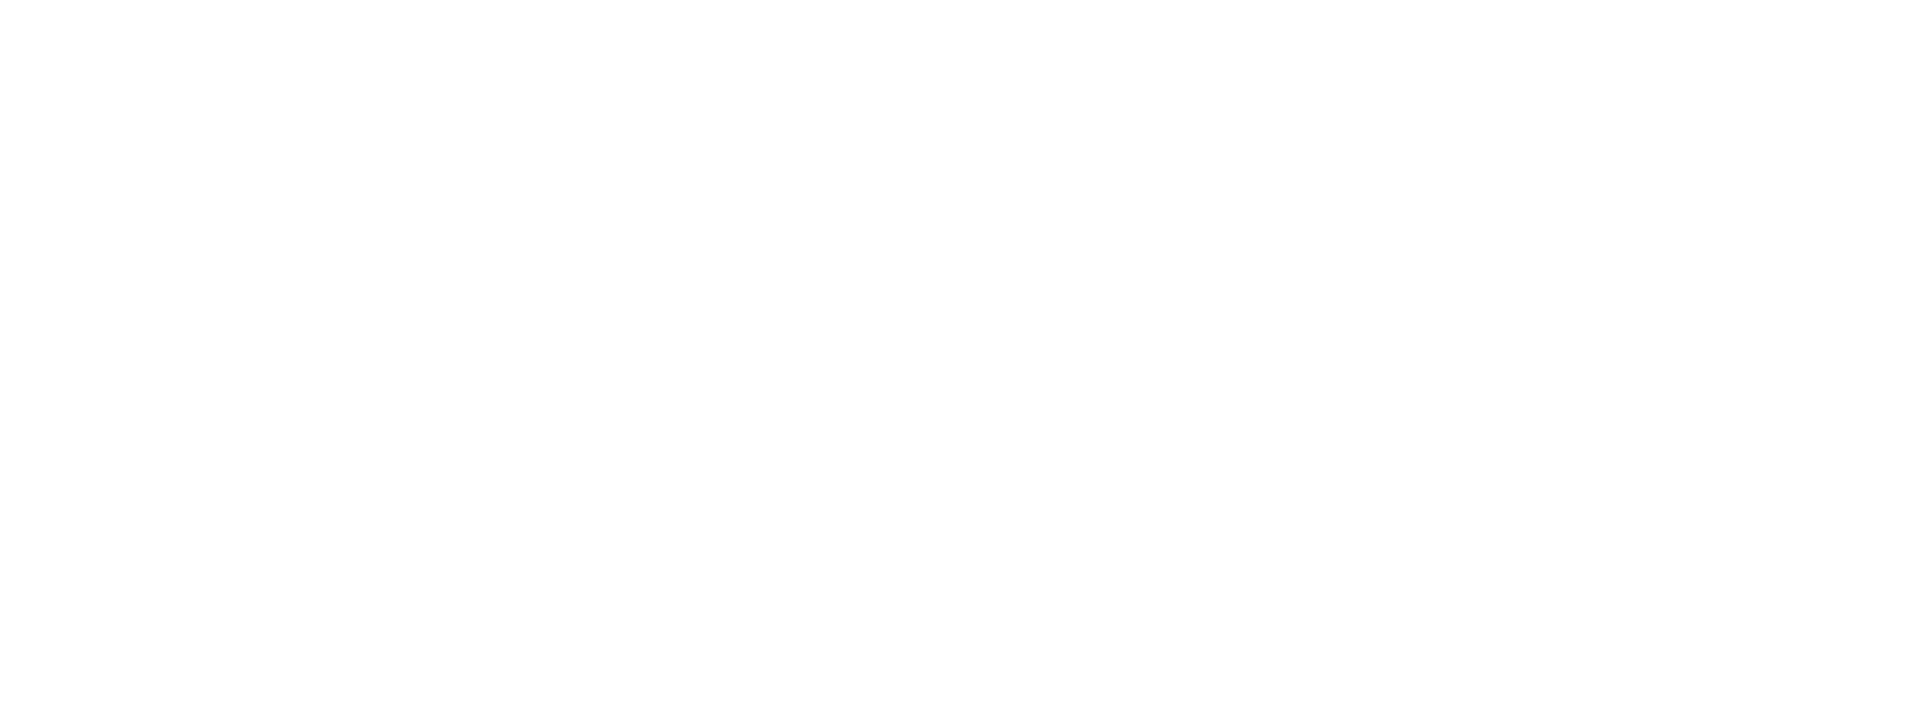 Logo for the New Haven Free Public Library with an owl